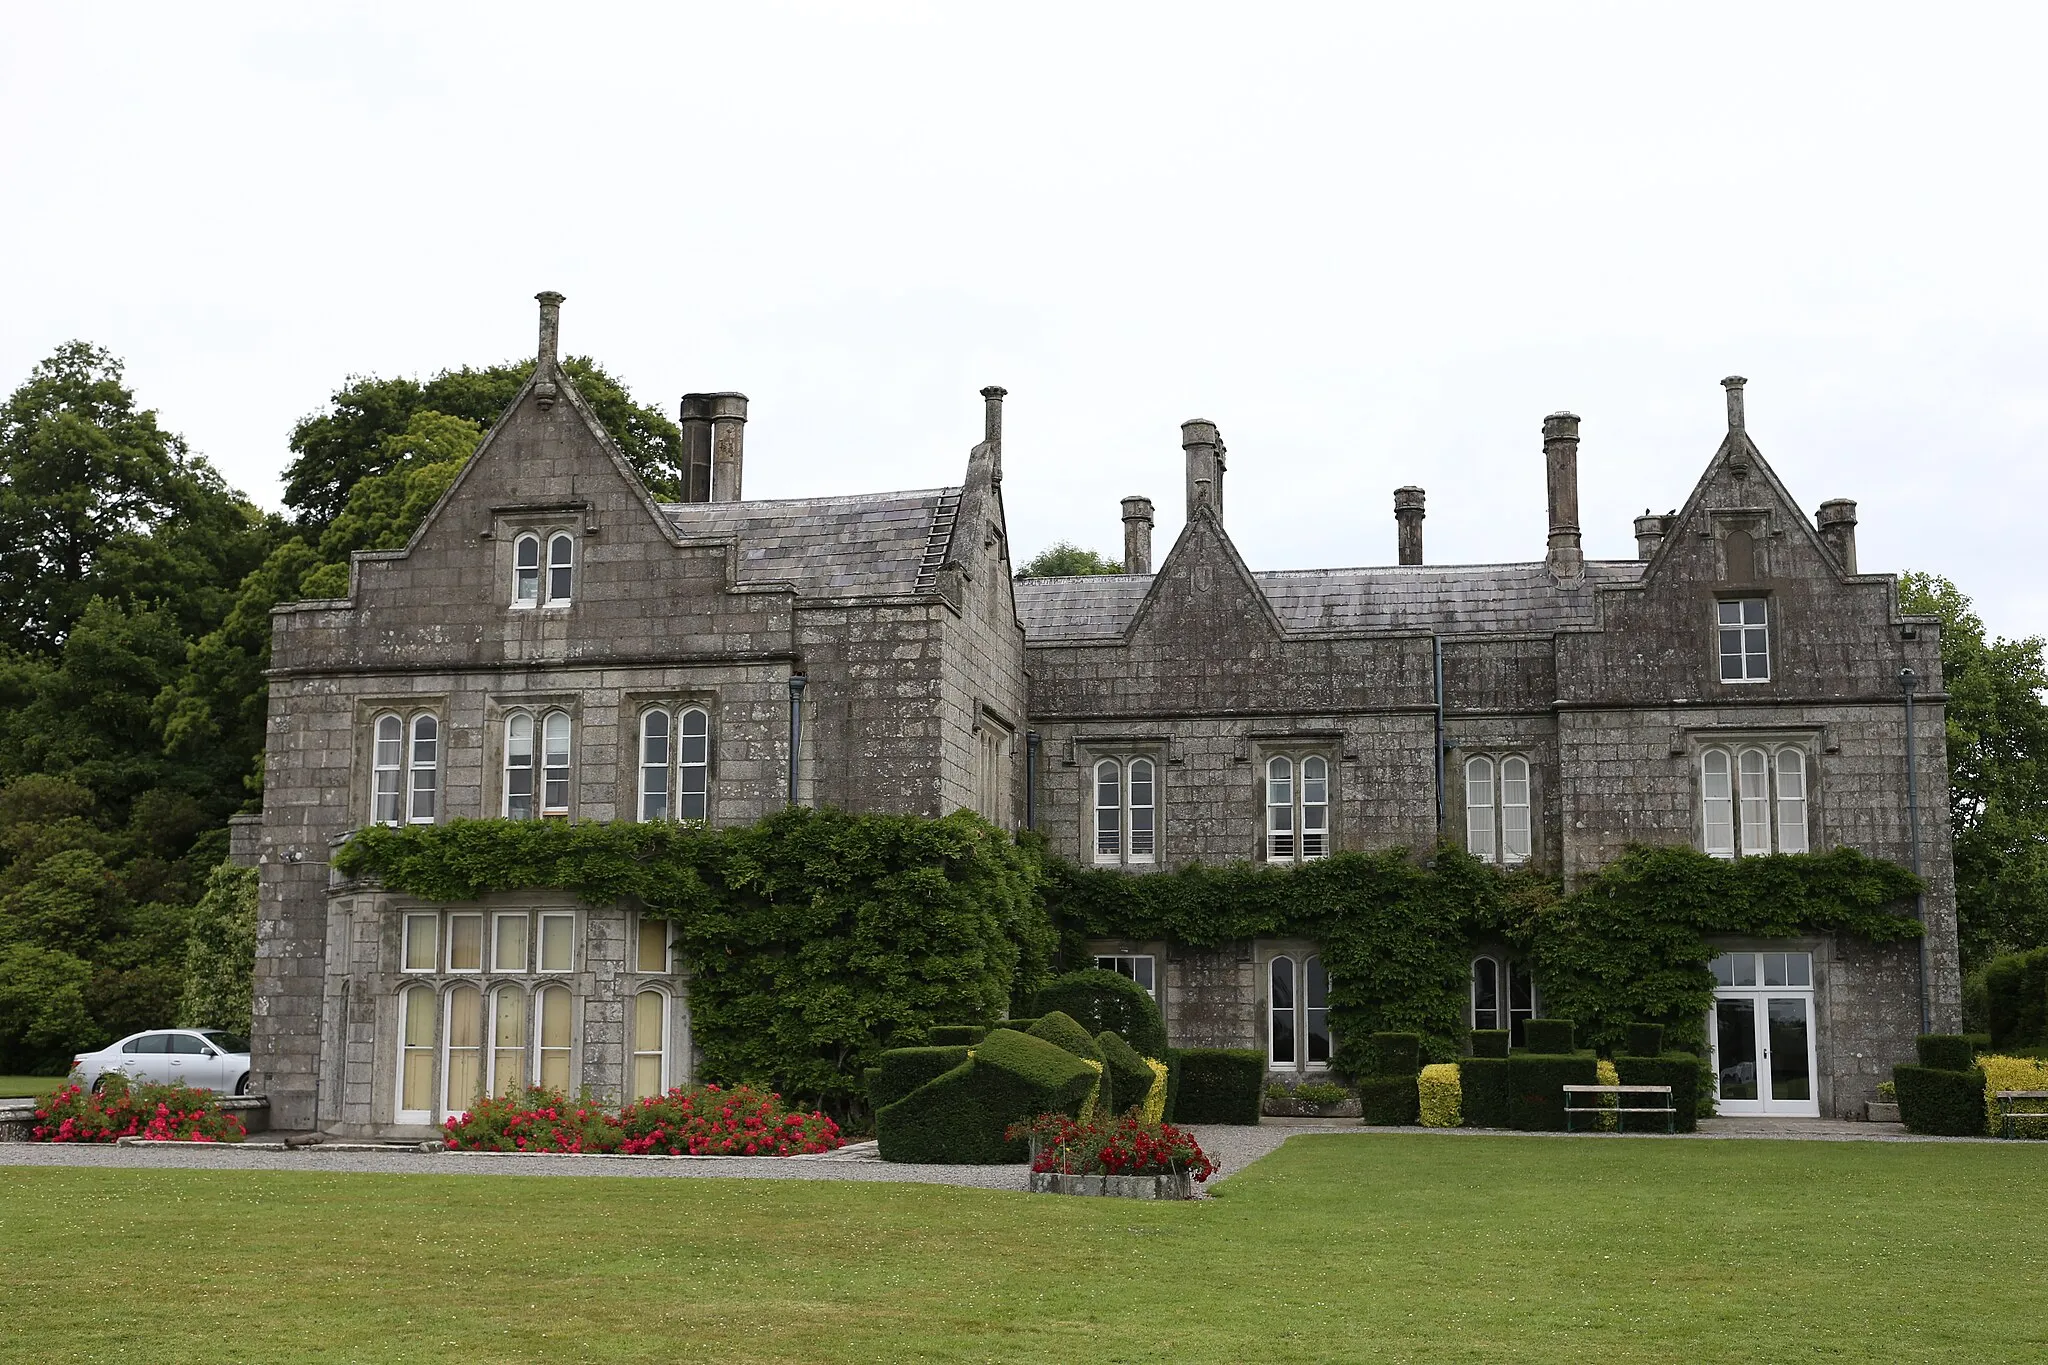 Photo showing: The Lisnavagh Estate lies just outside the village of Rathvilly in County Carlow, Ireland. Lisnavagh is the family seat of the McClintock-Bunbury family